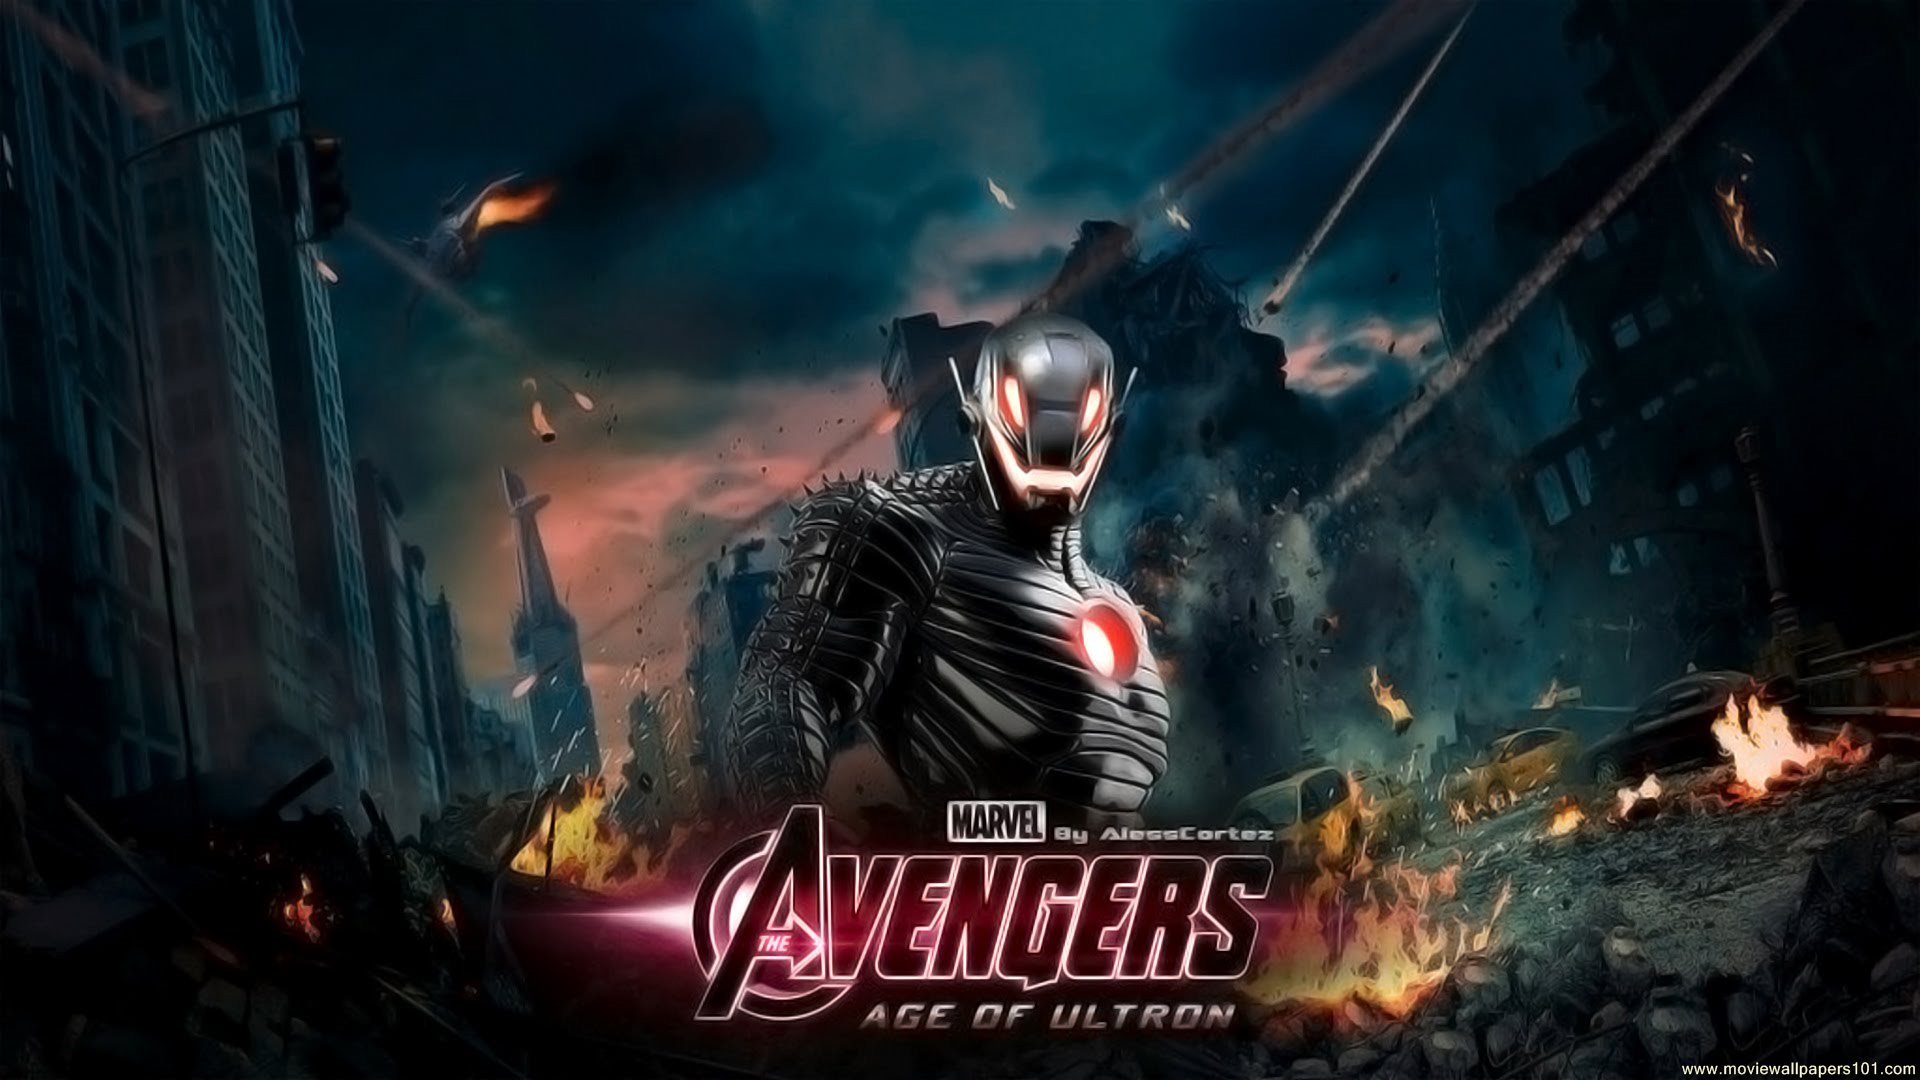 Avengers Age of Ultron wallpaper   1920x1080 MovieWallpapers101